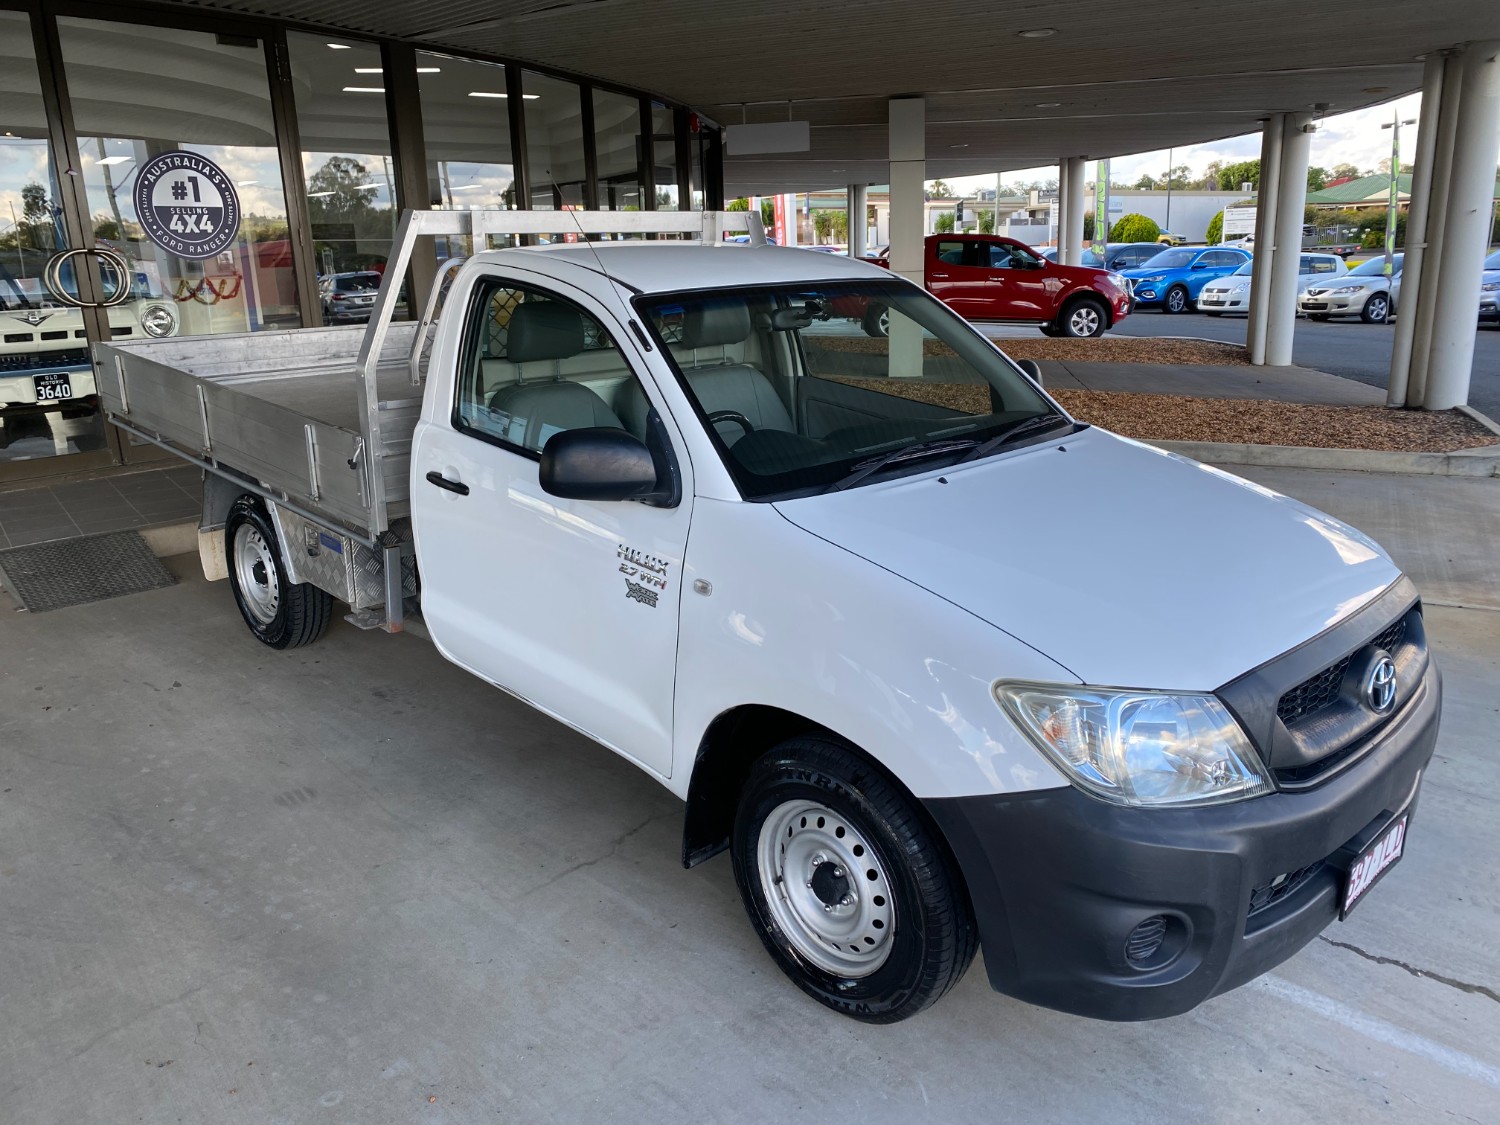 2010 Toyot HiLux Cab Chassis Image 21